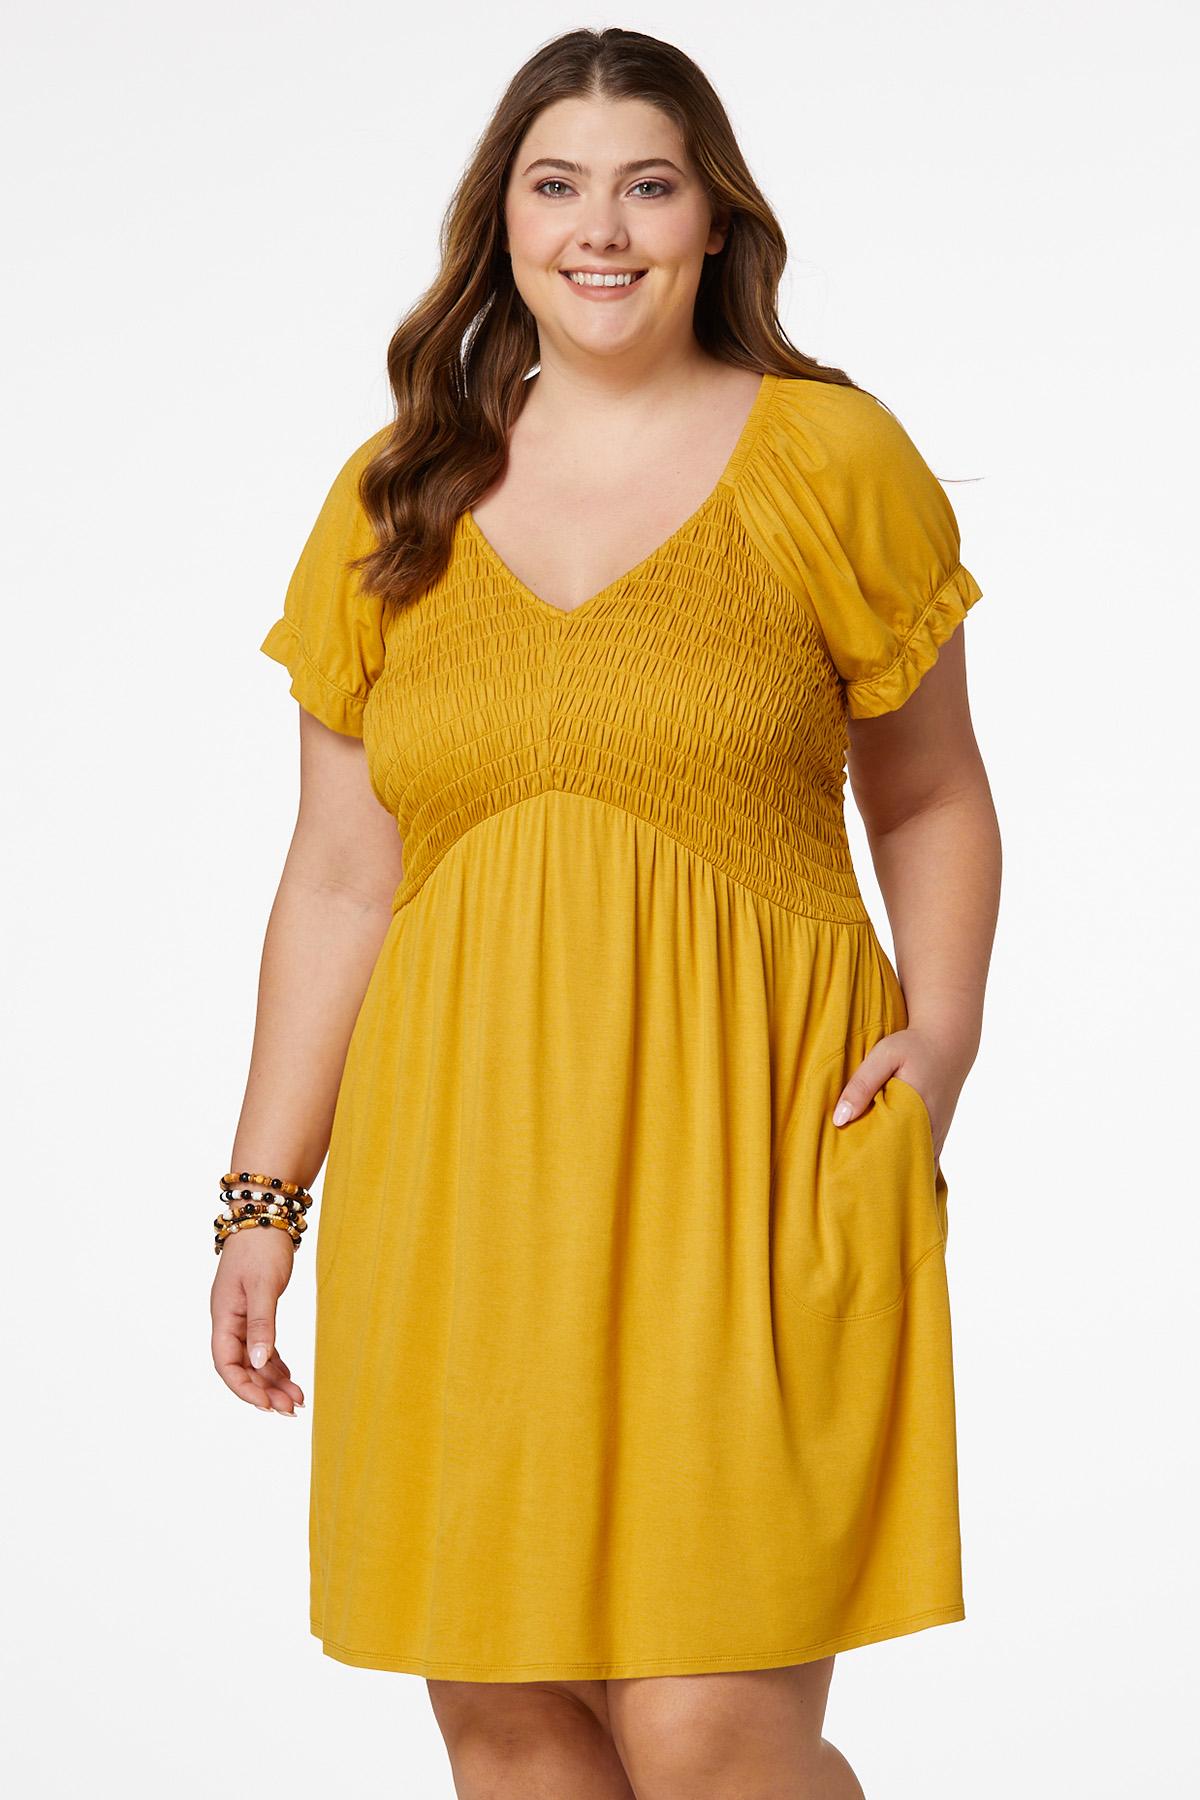 Plus size clothing stores for women - Top Shop Mood